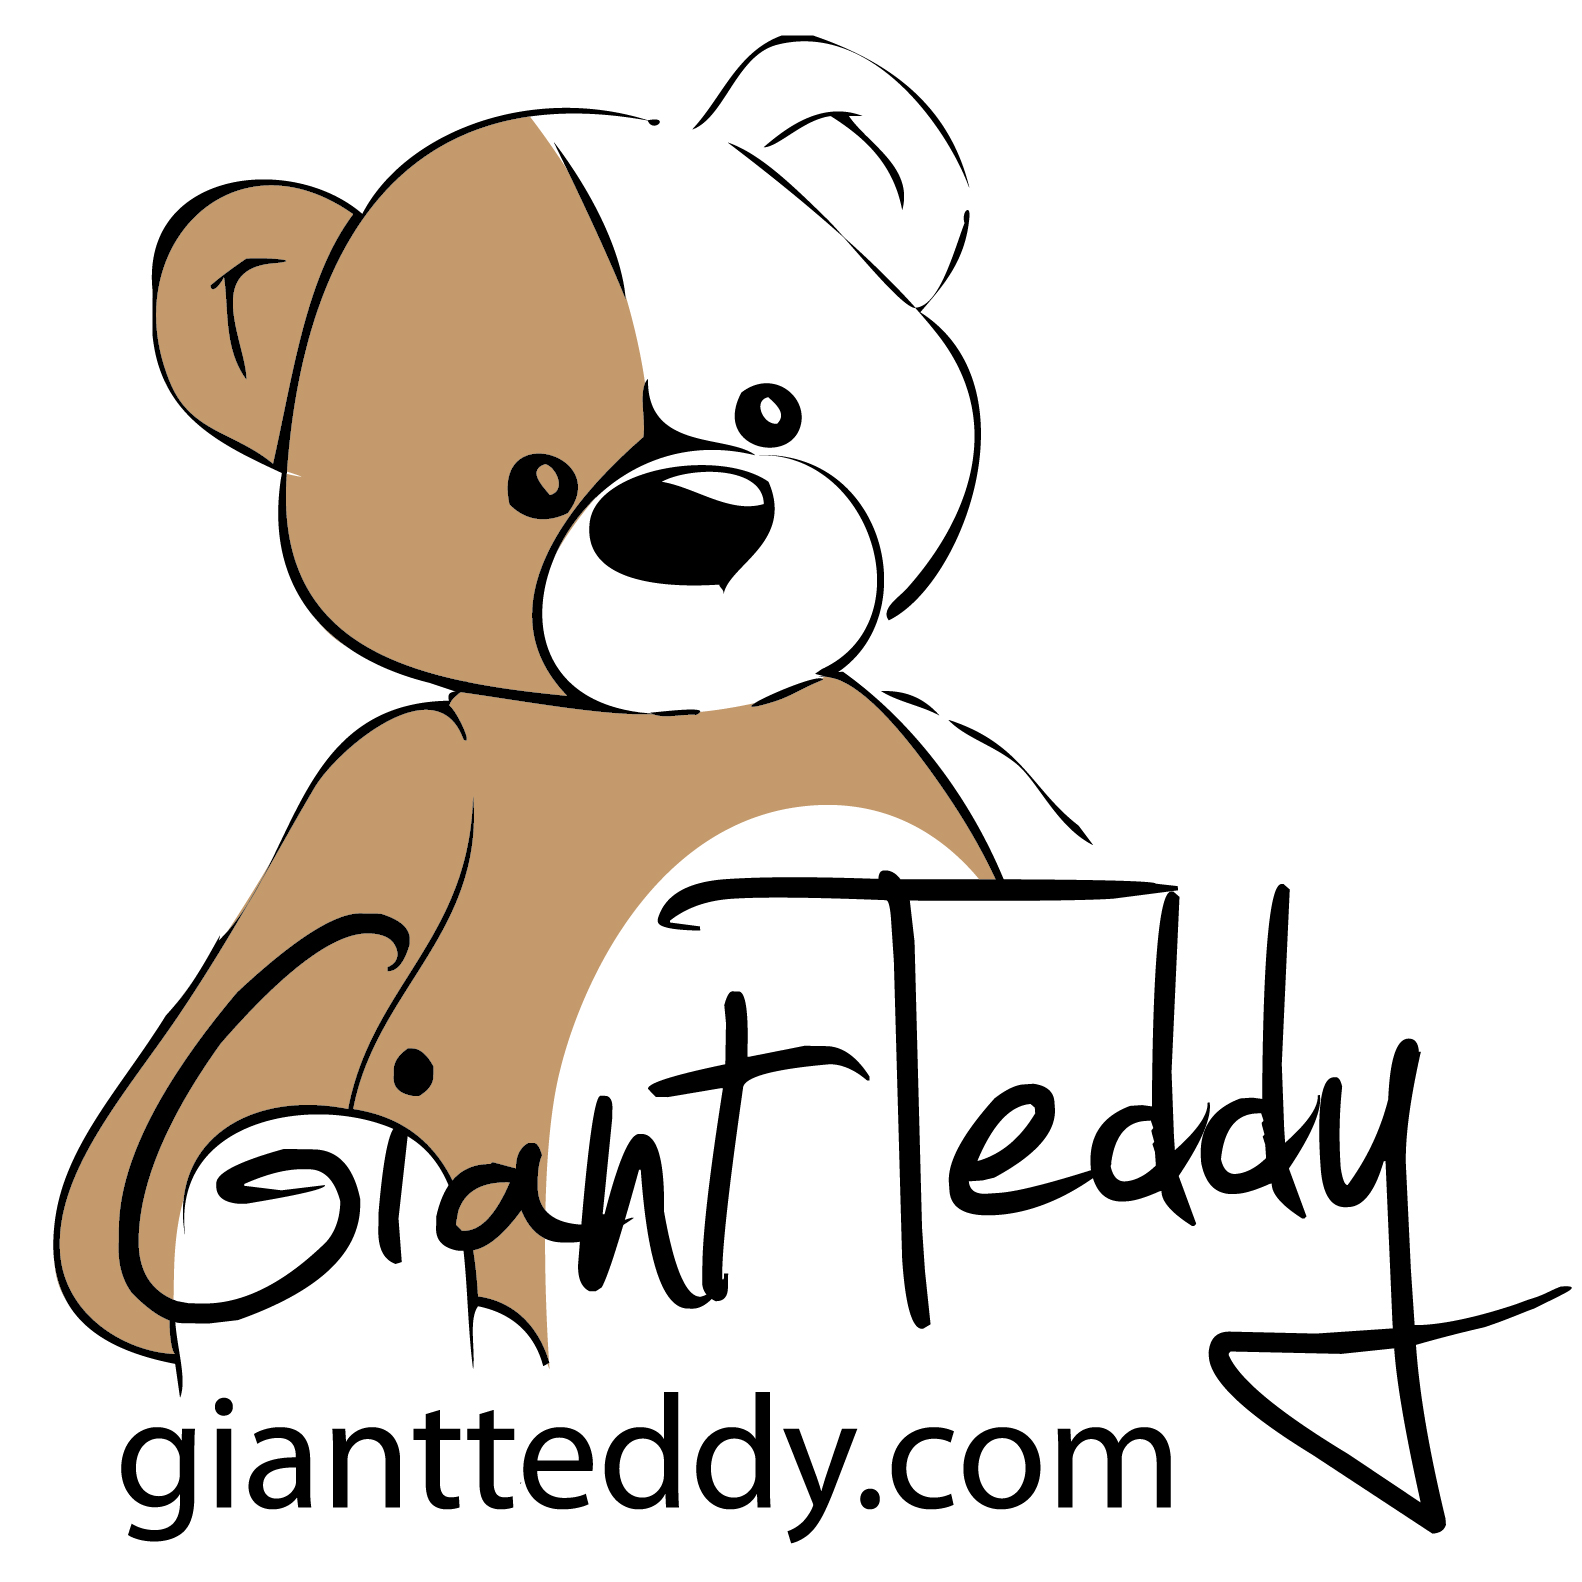 Giant Teddy is located in California and makes bears 2 to 6 feet tall